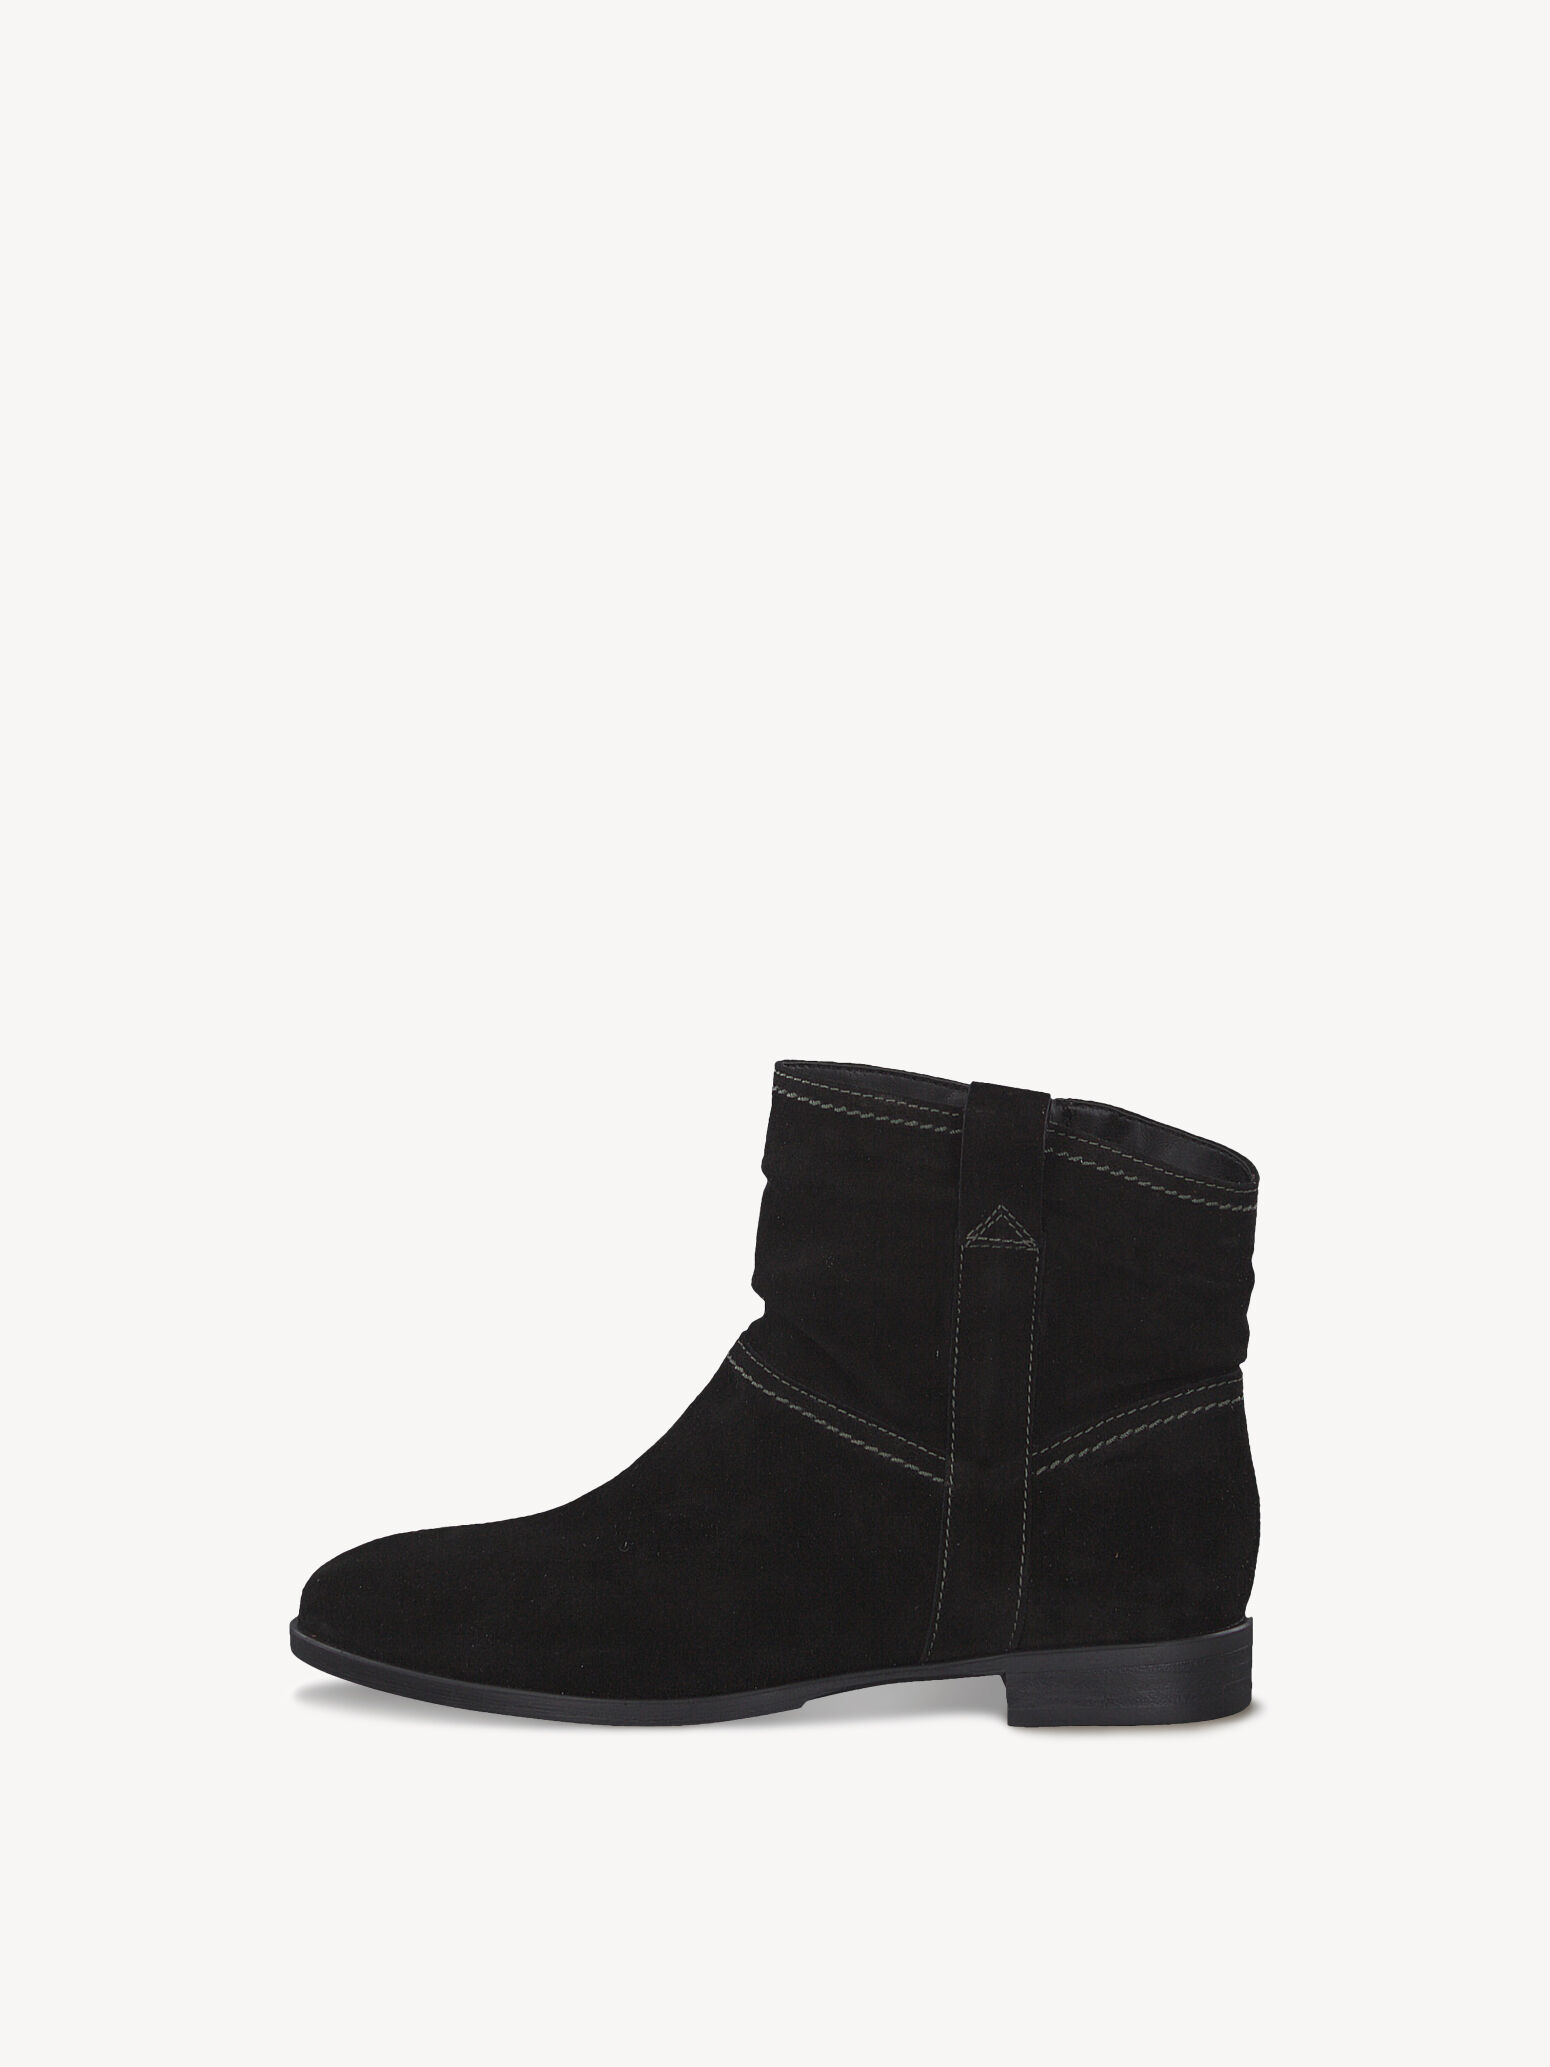 Leather Bootie 1-1-25950-25: Buy 